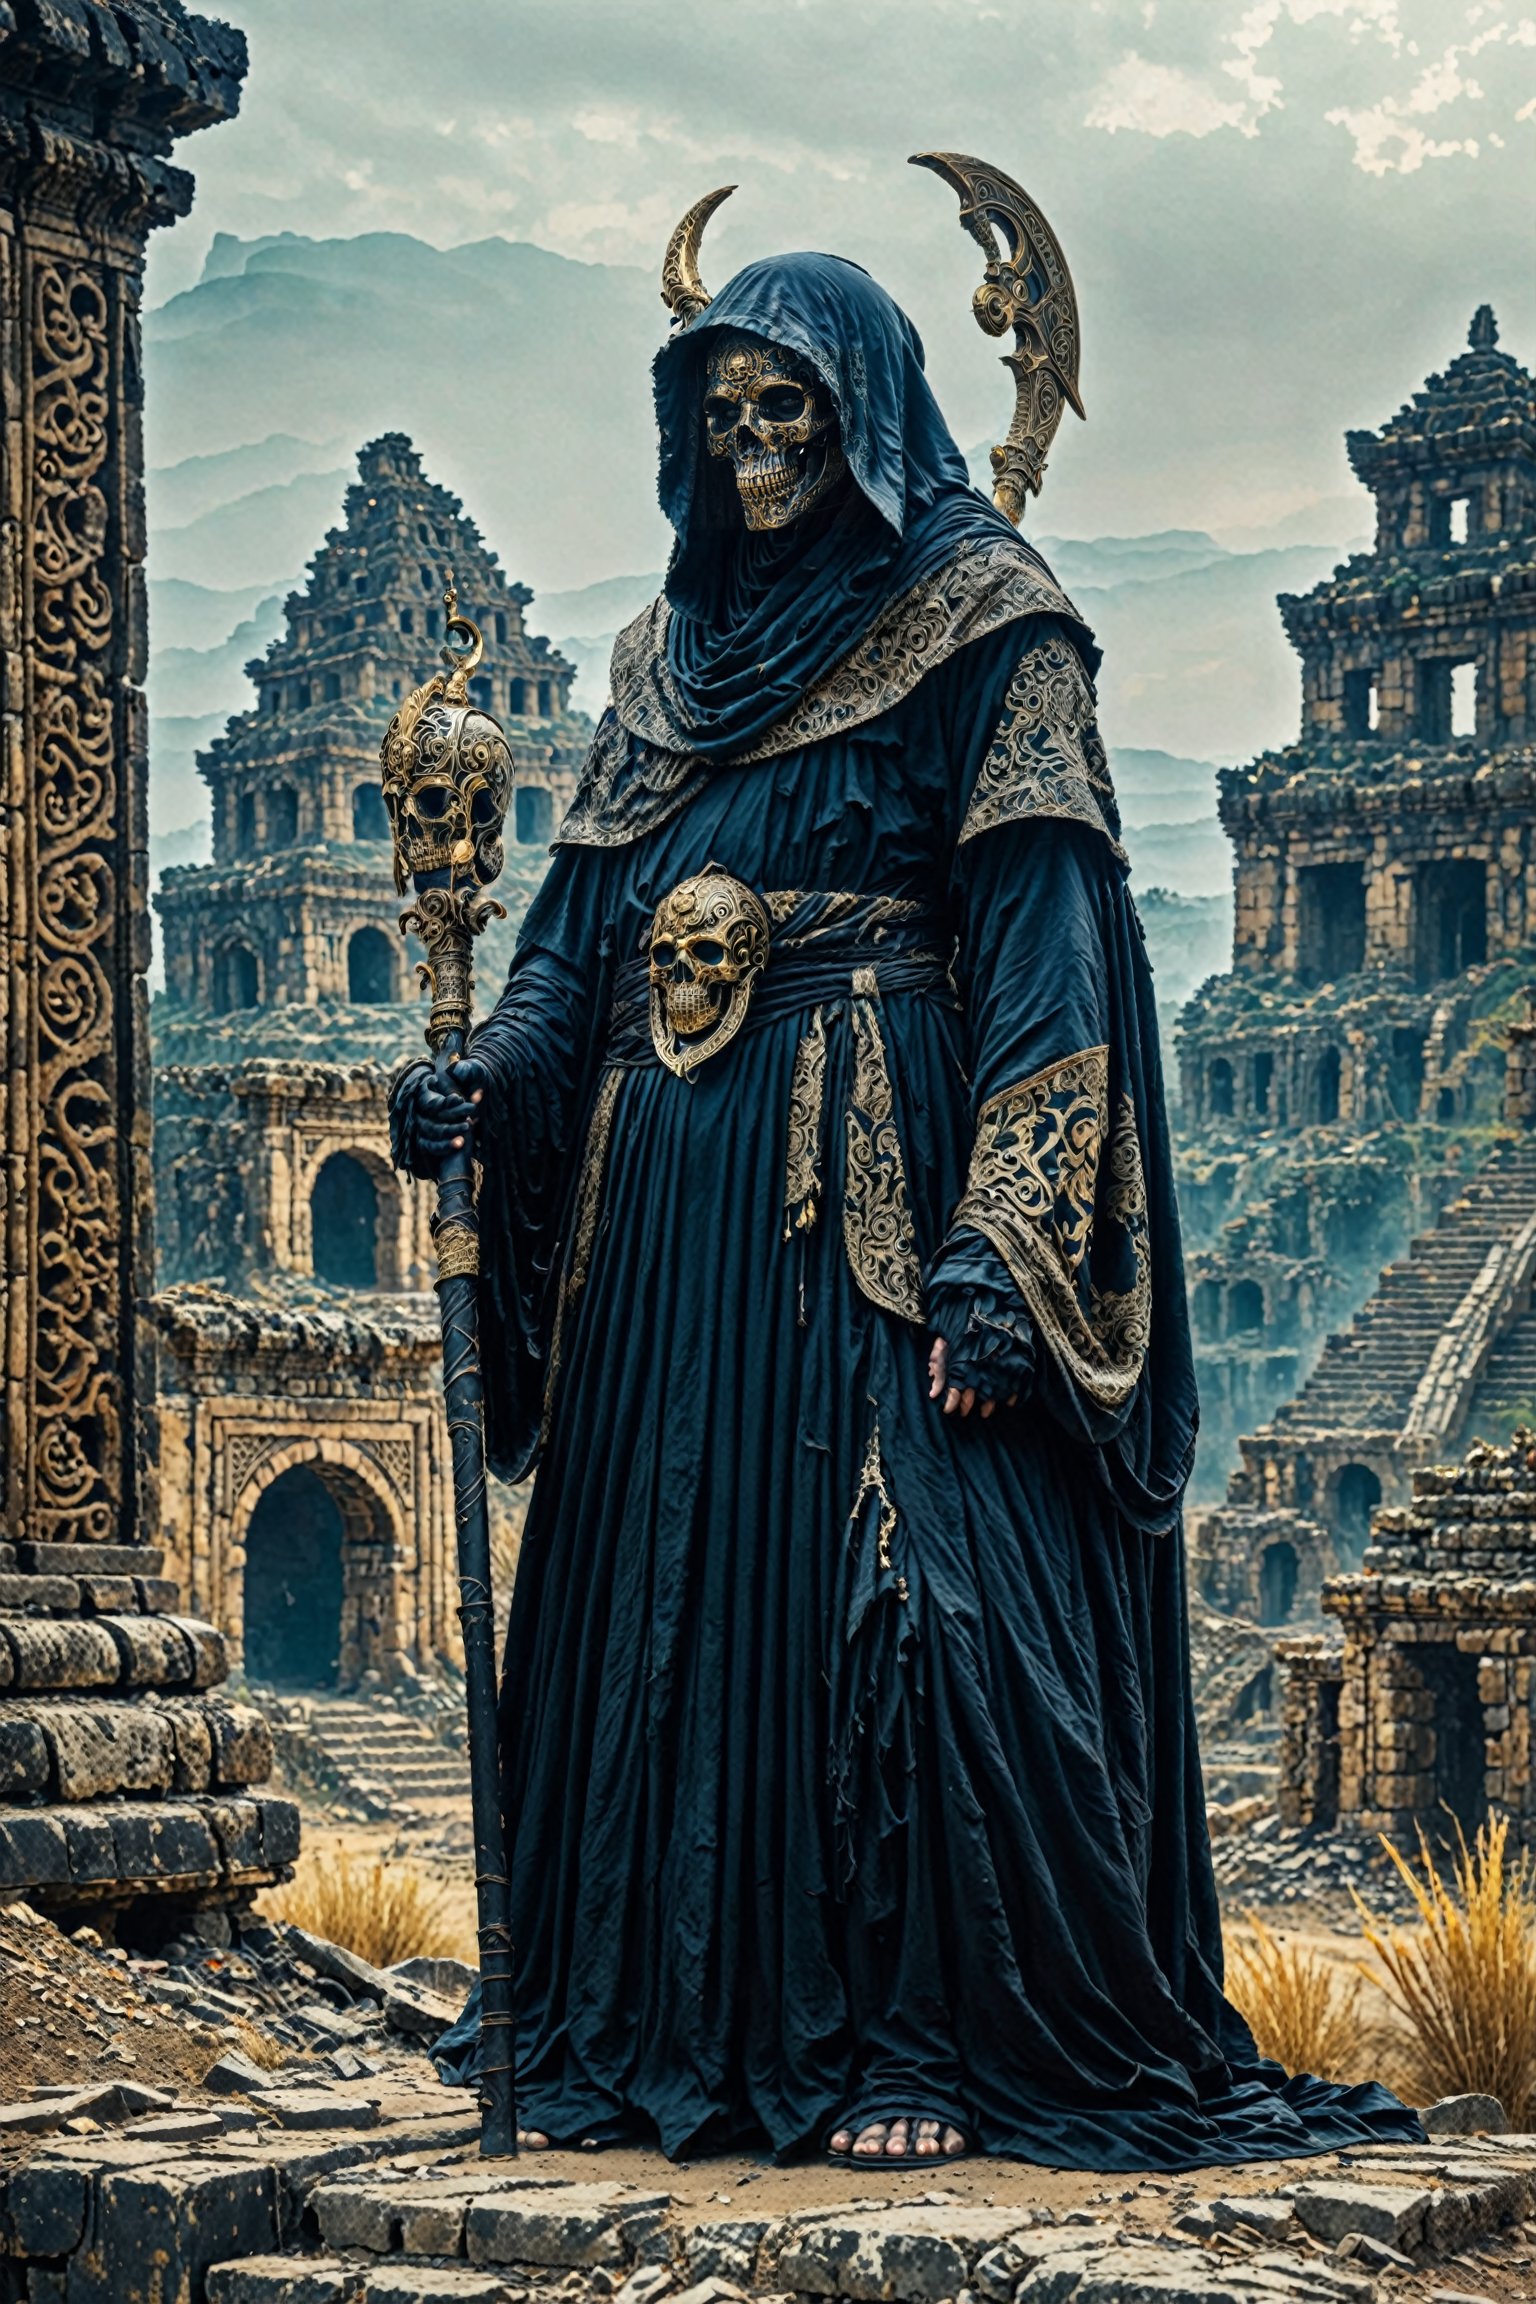 A mysterious figure draped in a dark, ornate robe with intricate designs. The figure wears a hood that conceals most of their face, revealing only a skull-like mask. They are holding a staff with a unique design at the top, and another object resembling a curved blade or scythe in their other hand. The background depicts a desolate landscape with ruins of ancient structures, possibly a city or fortress. The atmosphere is misty, adding to the eerie and foreboding ambiance of the scene.